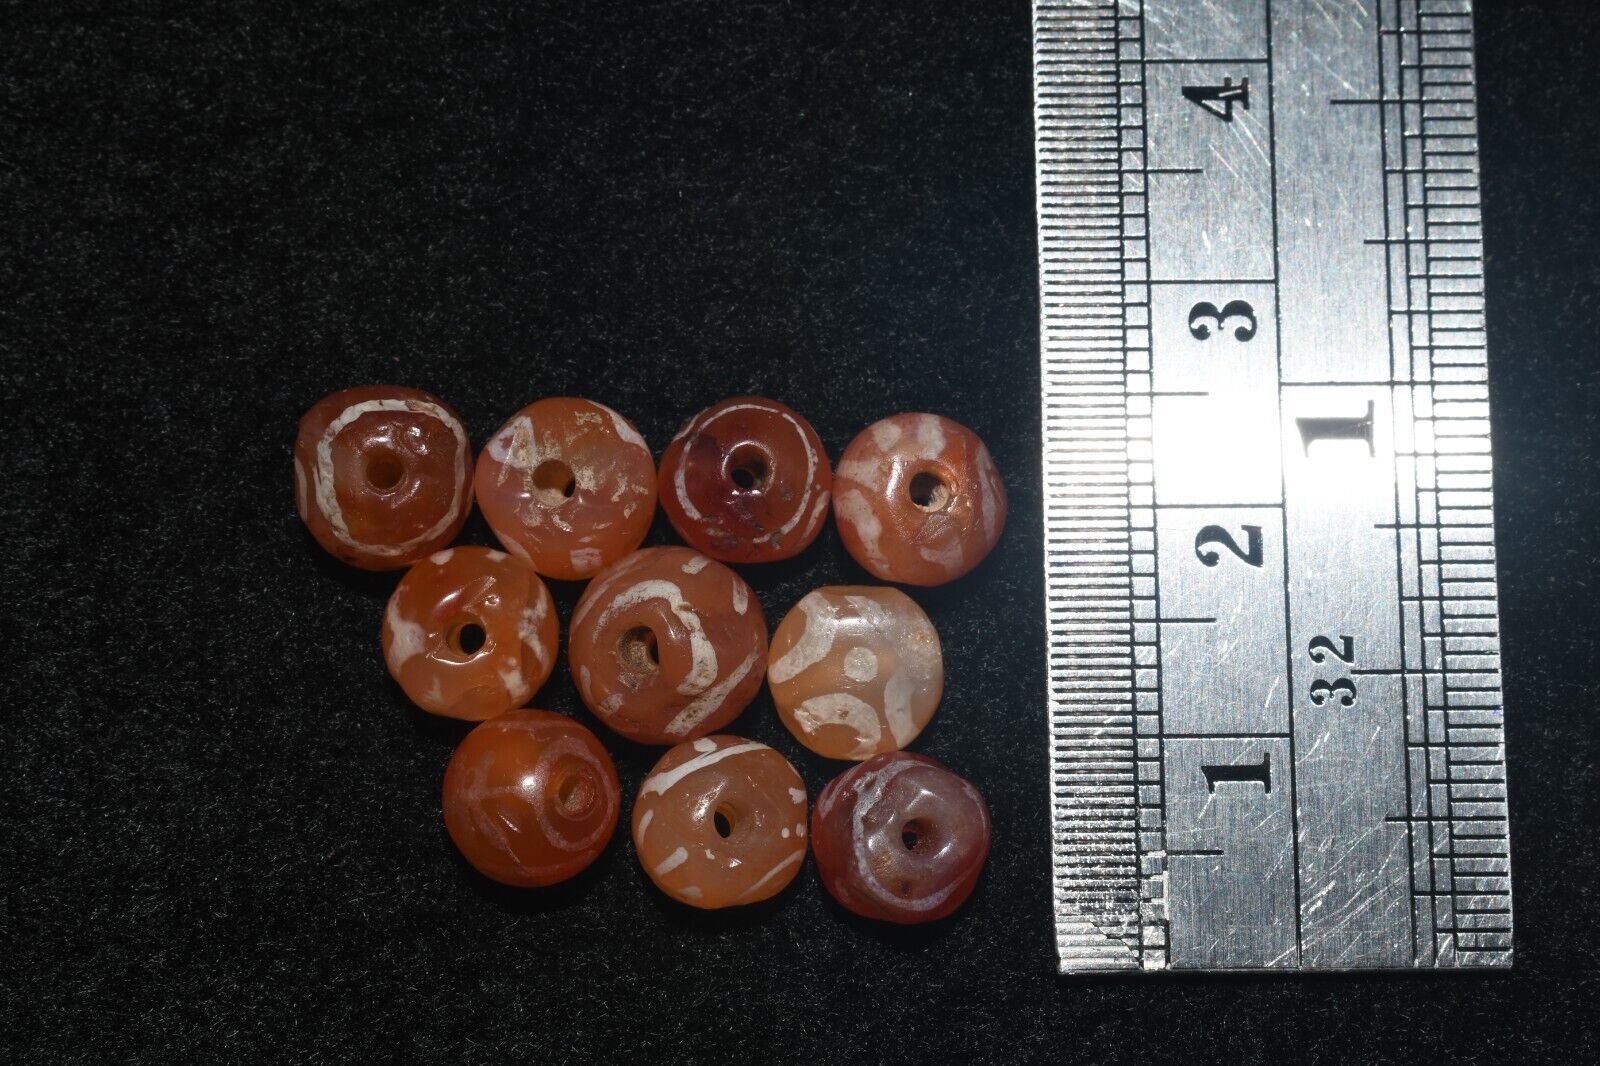 Authentic 10 Ancient Indus Valley Etched Round Carnelian Beads Ca. 2600-1700 BCE Без бренда - фотография #8